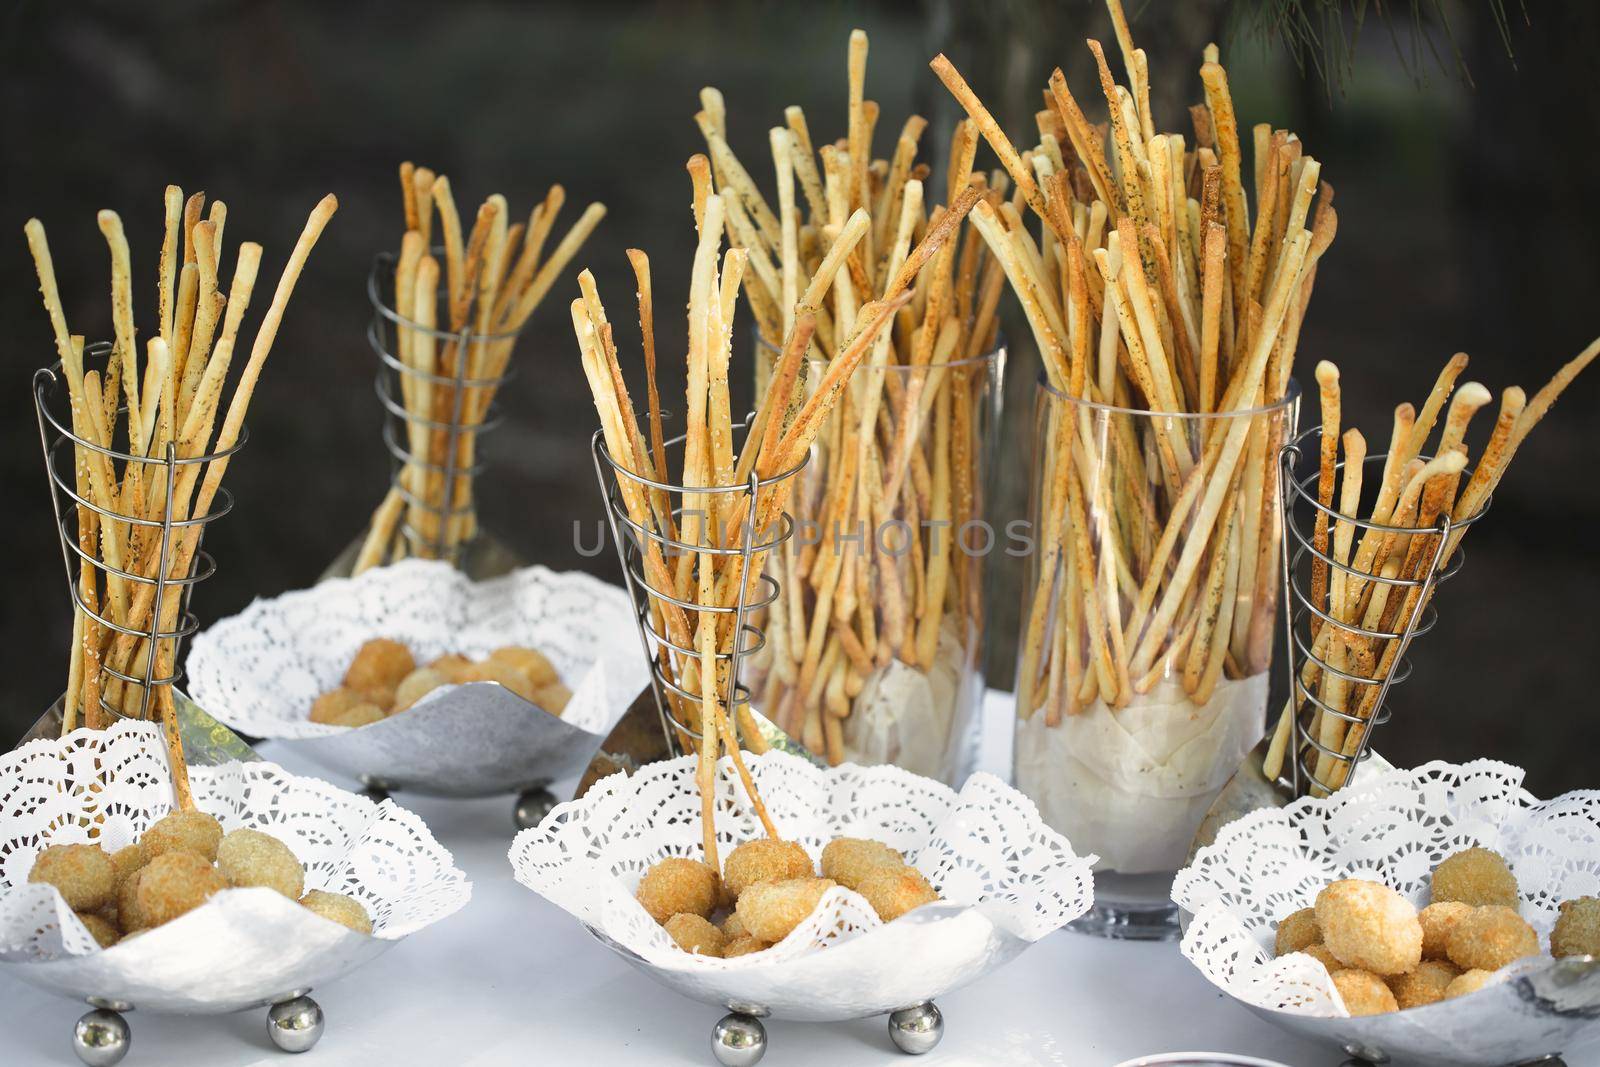 Breadsticks and snacks on the buffet table by StudioPeace